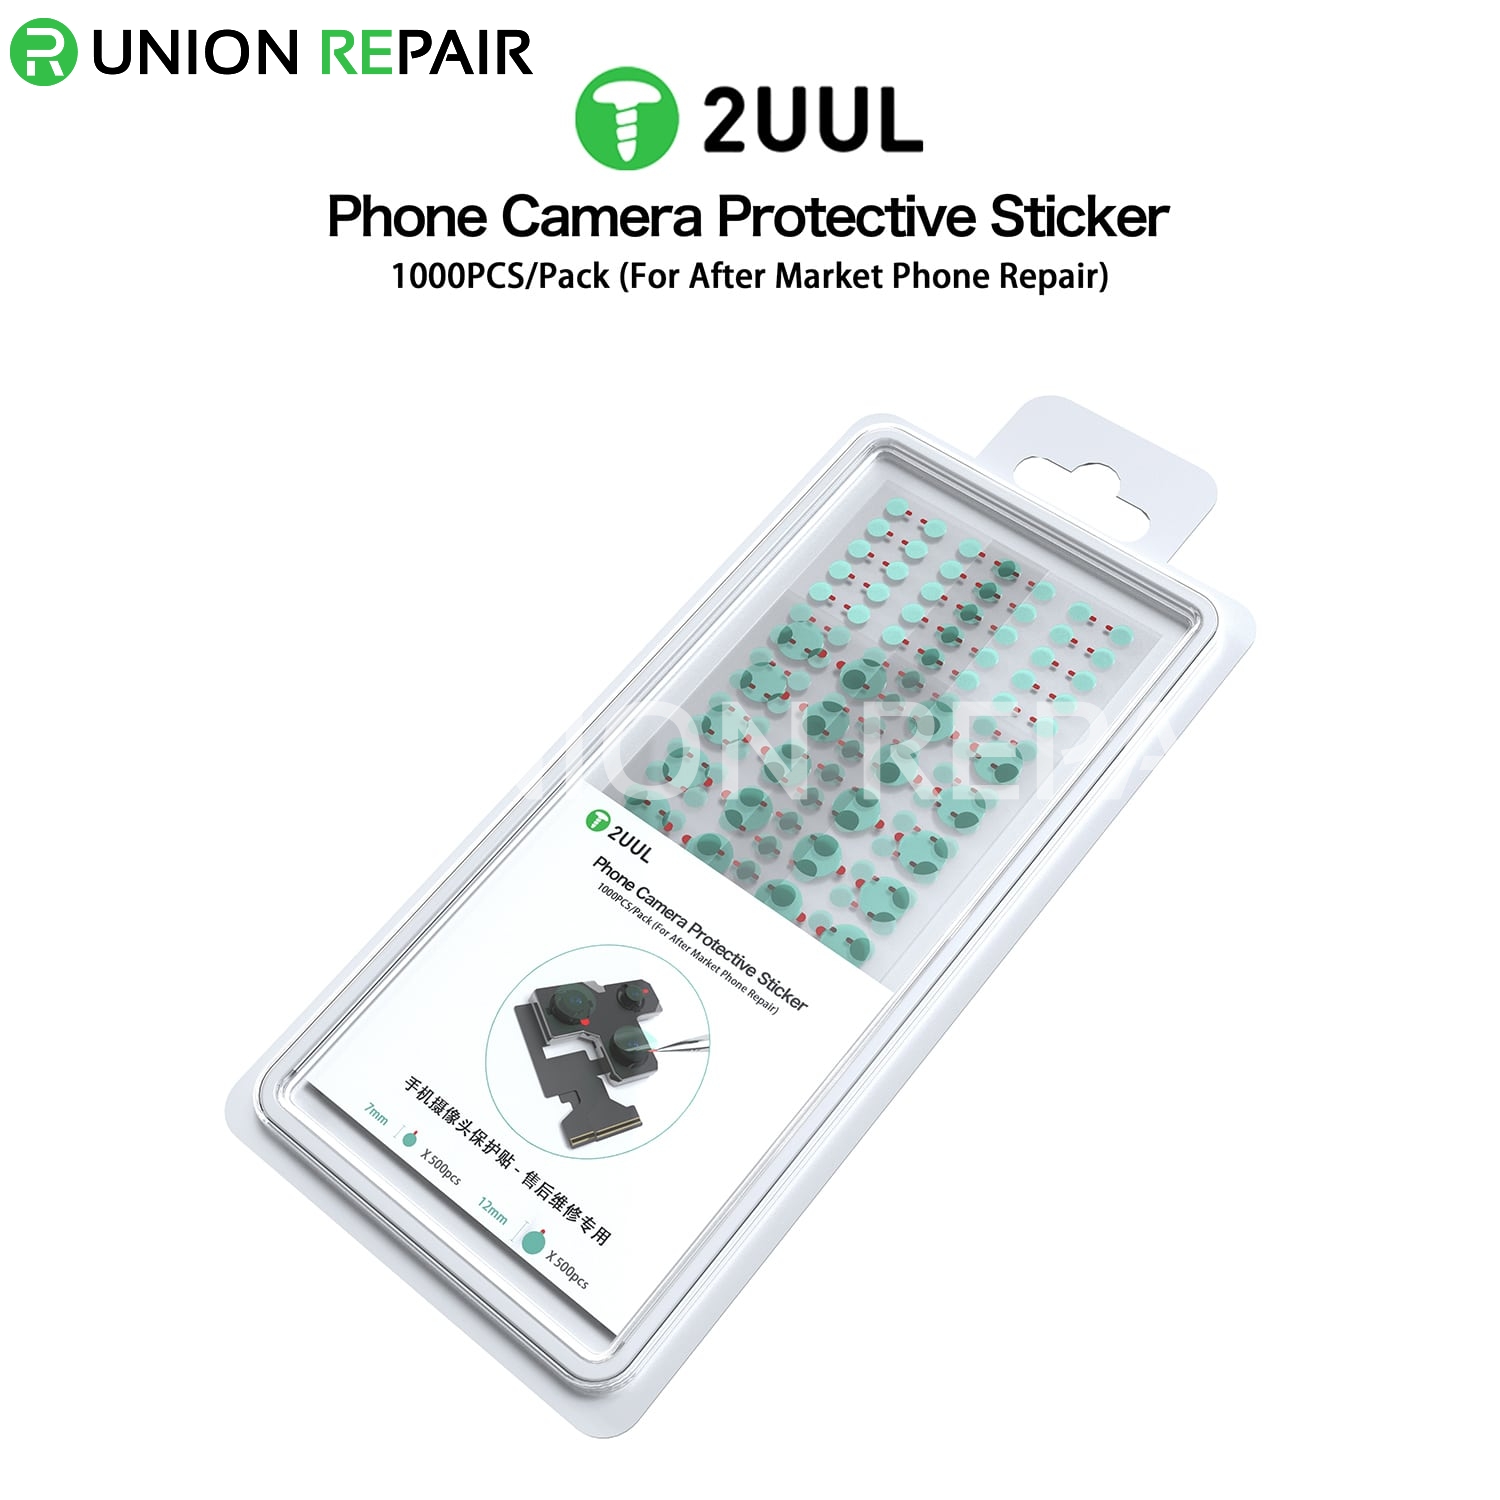 2UUL Phone Camera Protective Sticker (1000pcs/pack)